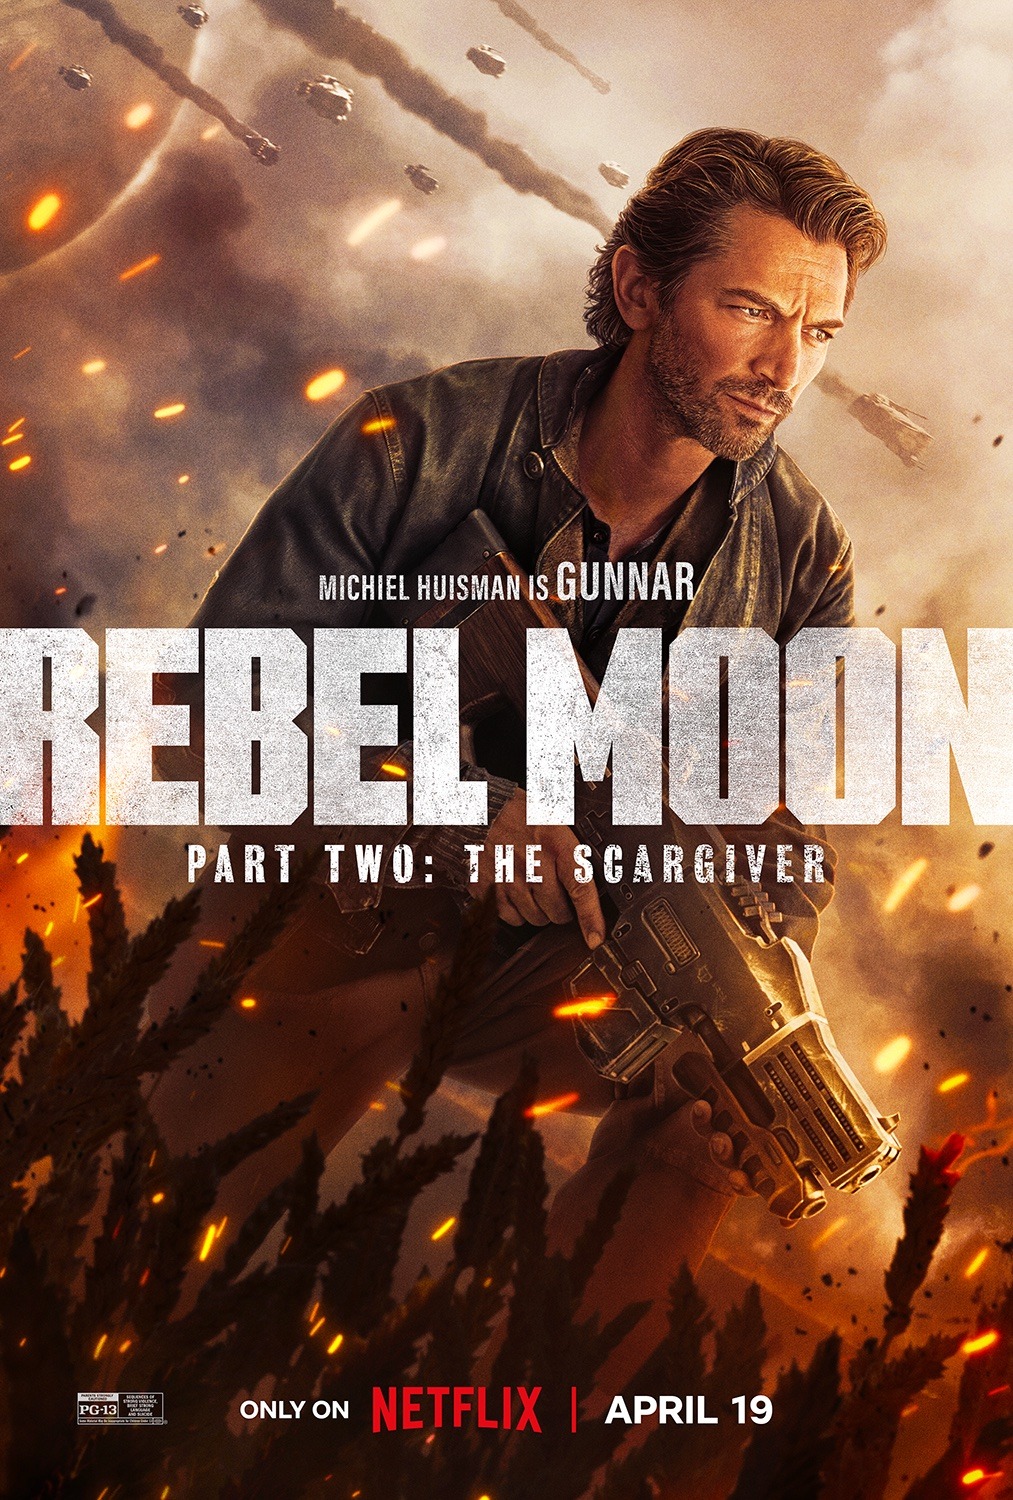 Extra Large Movie Poster Image for Rebel Moon - Part Two: The Scargiver (#7 of 14)